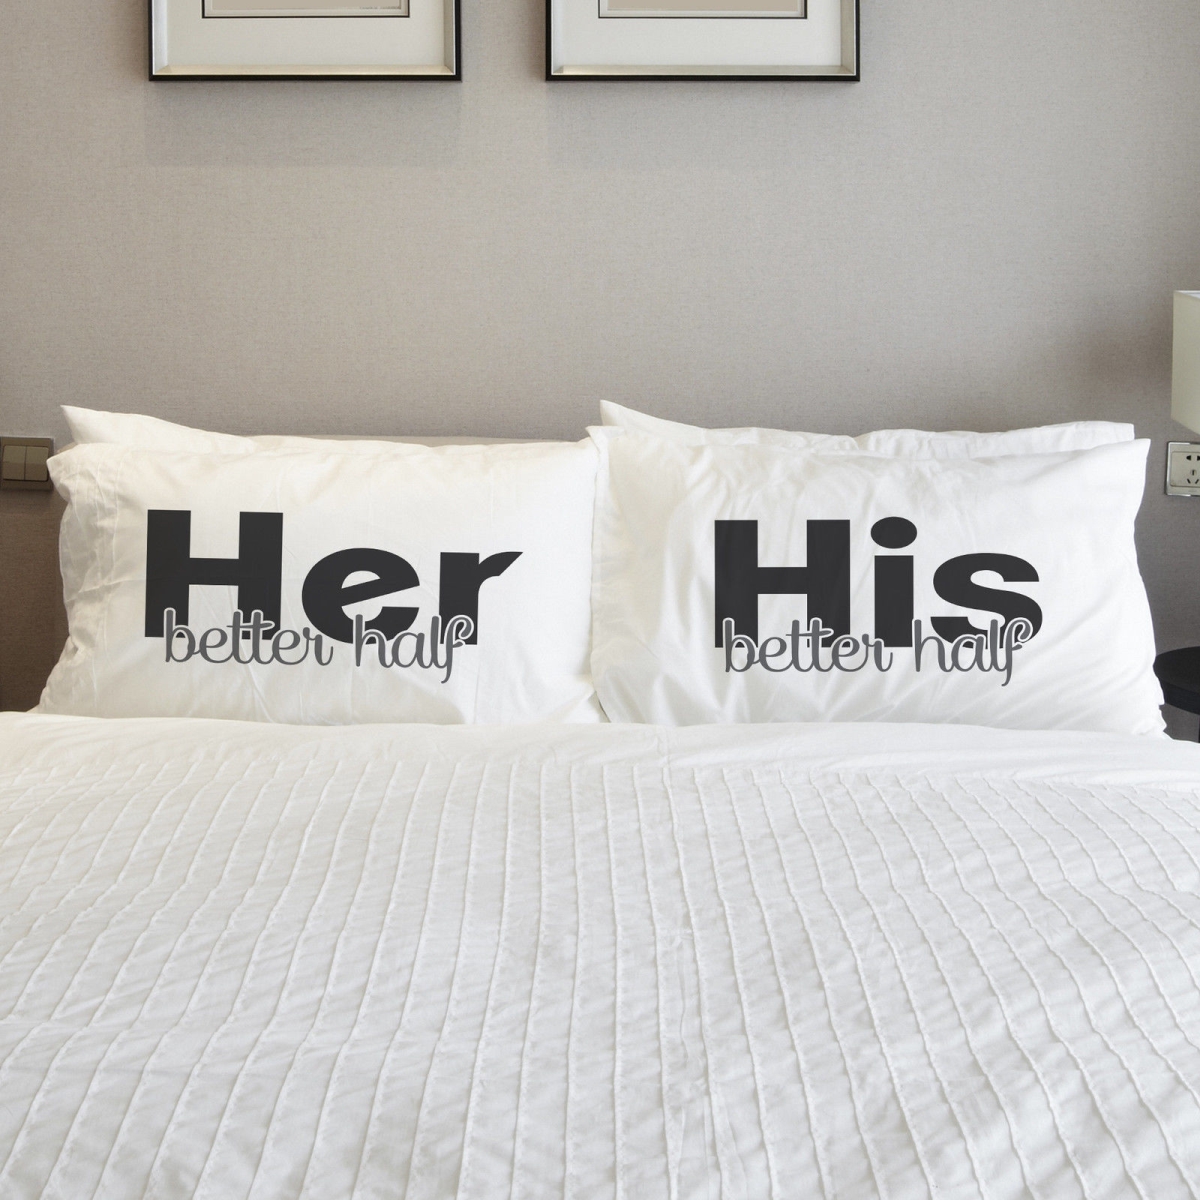 74515pce59 15 X 19 In. His Her Better Half Black Pillowcases, Black Gray - Set Of 2